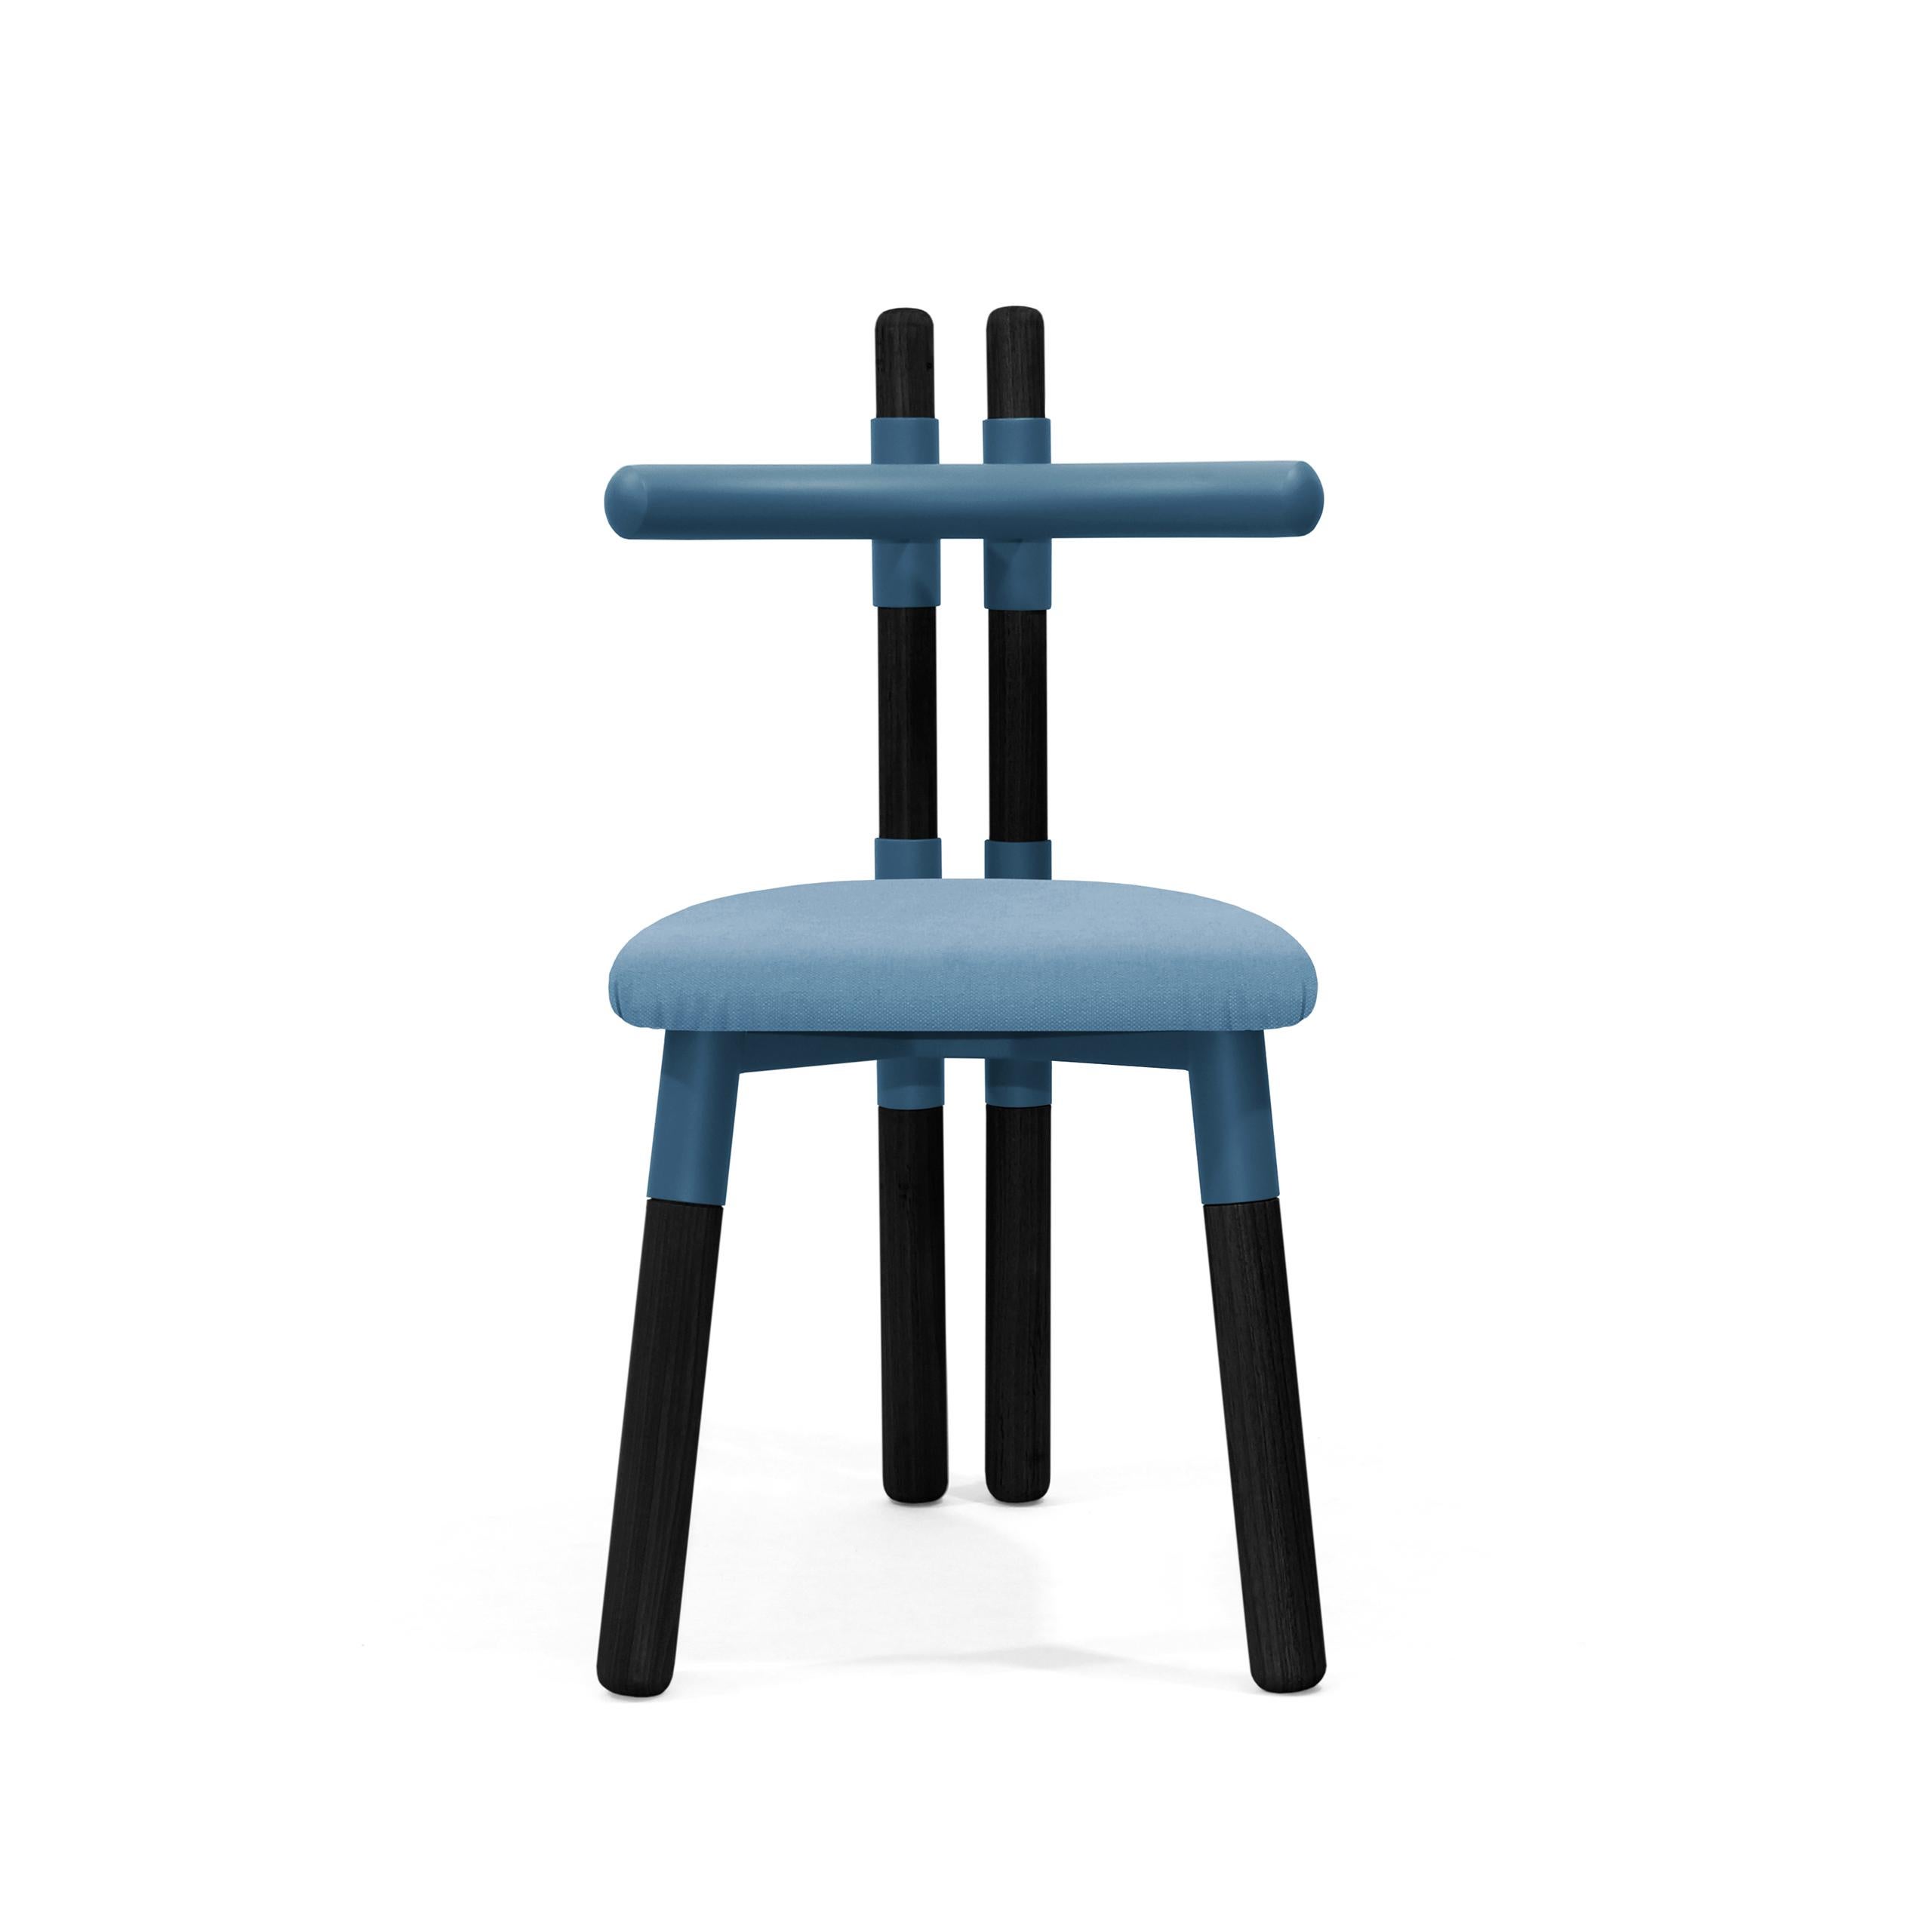 Modern Upholstered PK12 Chair, Steel Structure and Ebonized Wood Legs by Paulo Kobylka For Sale